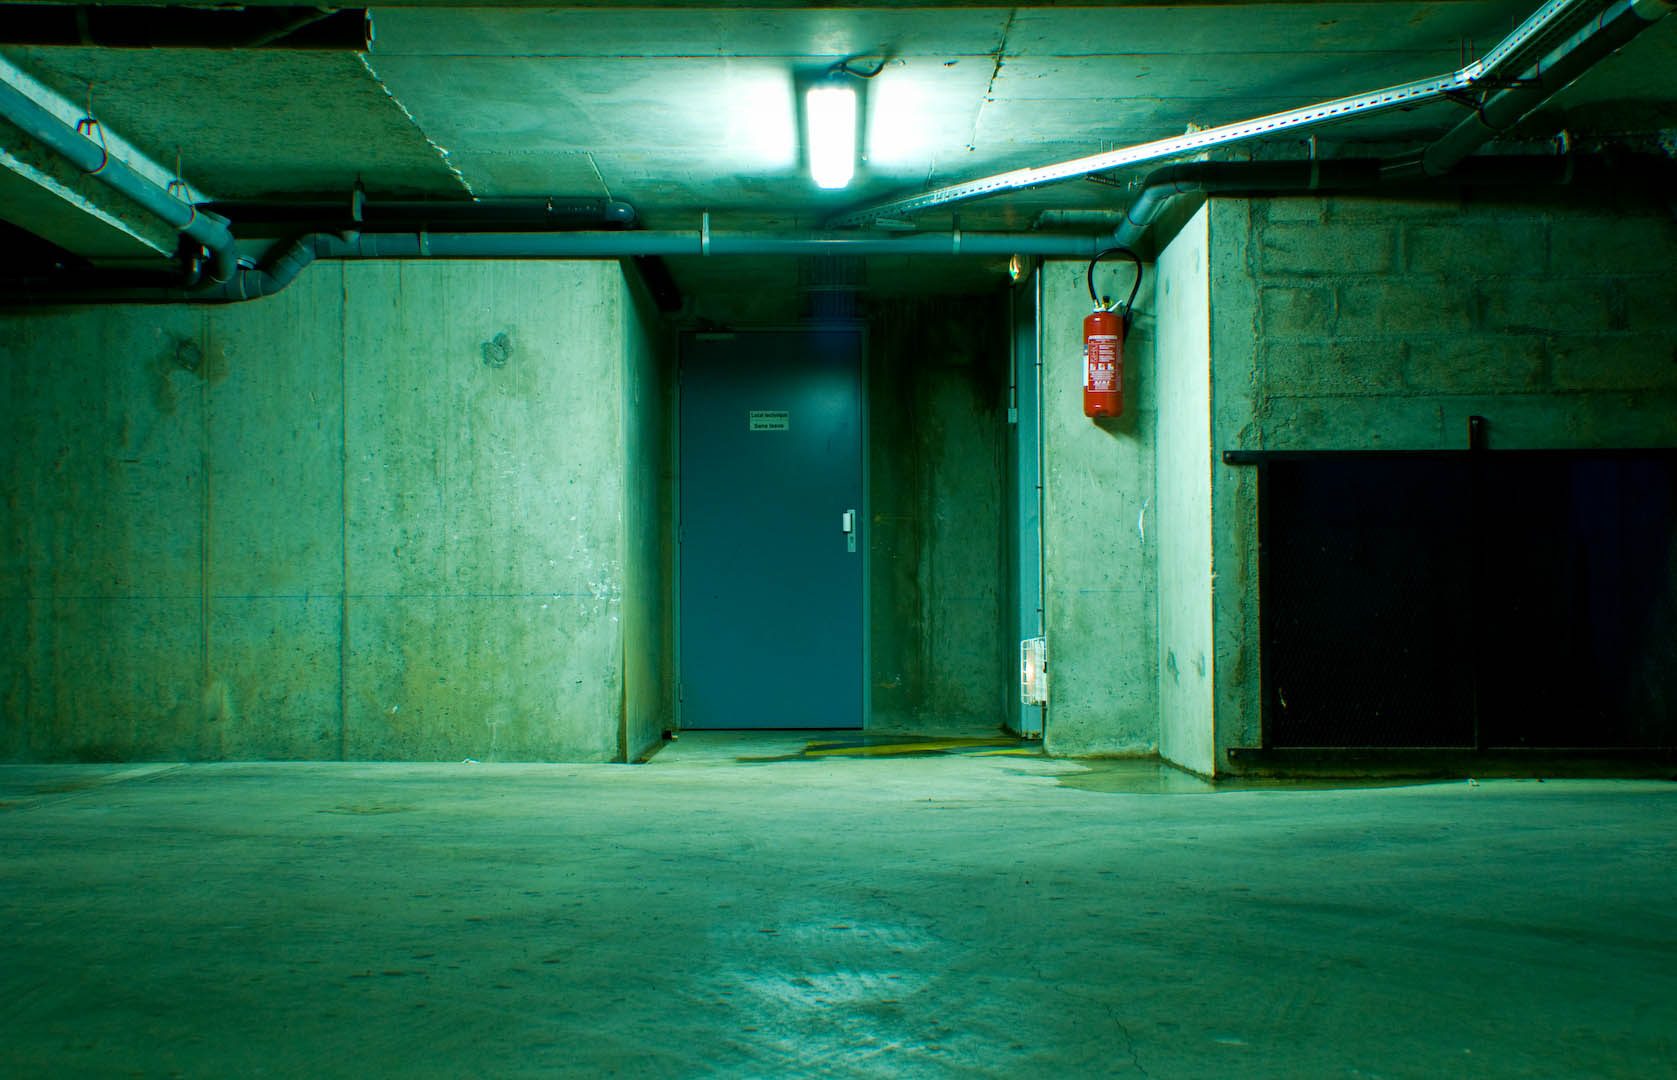 Parking lot underground france car green spooky mood oppressed scary fire extinguisher exit emergency.jpg